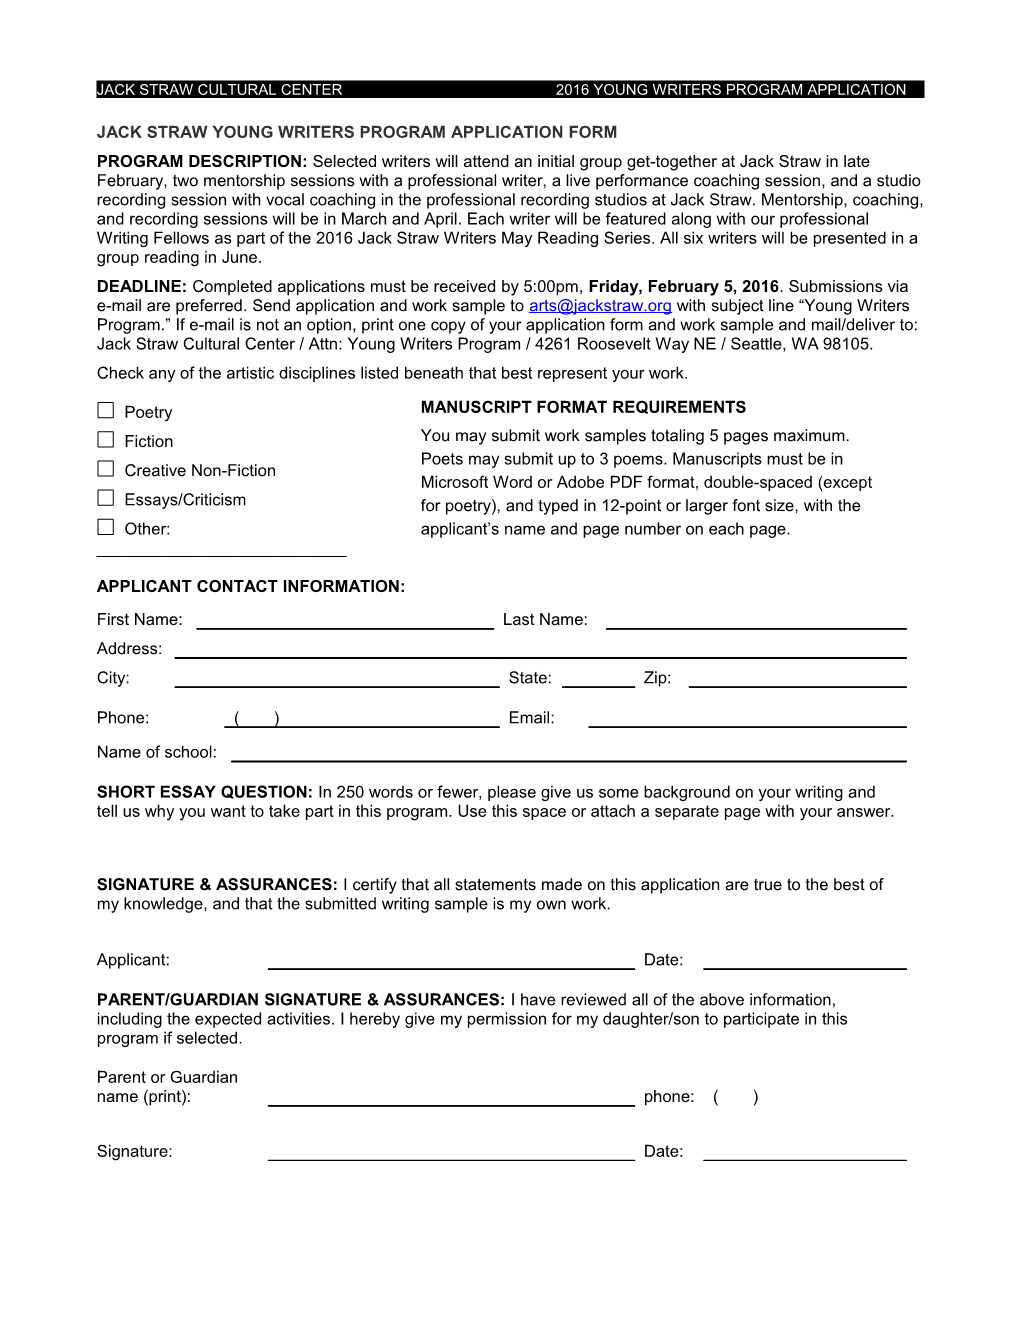 Jack Straw Young Writers Program Application Form